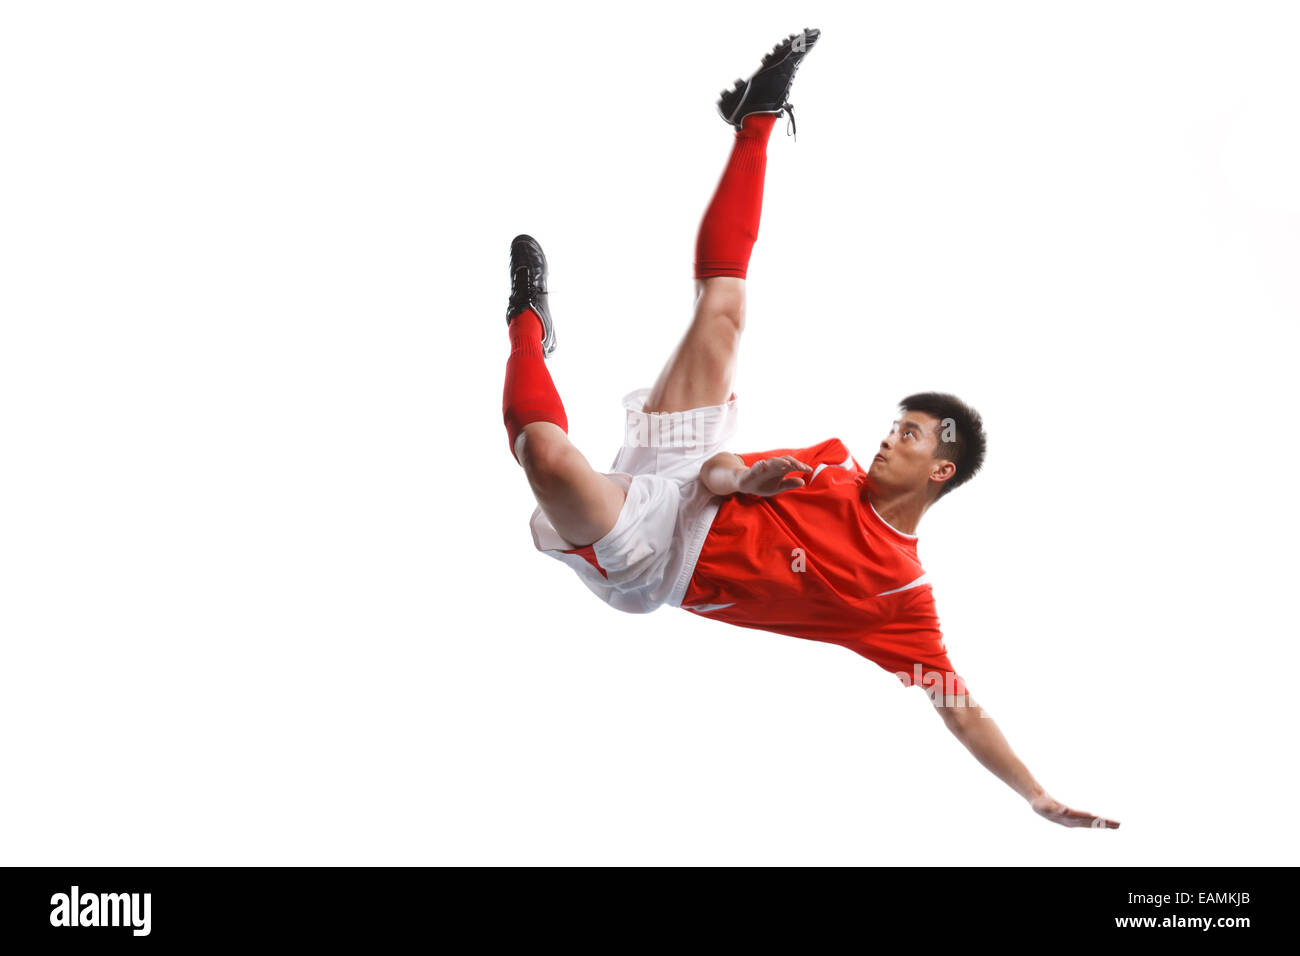 The football player handstand to play football Stock Photo